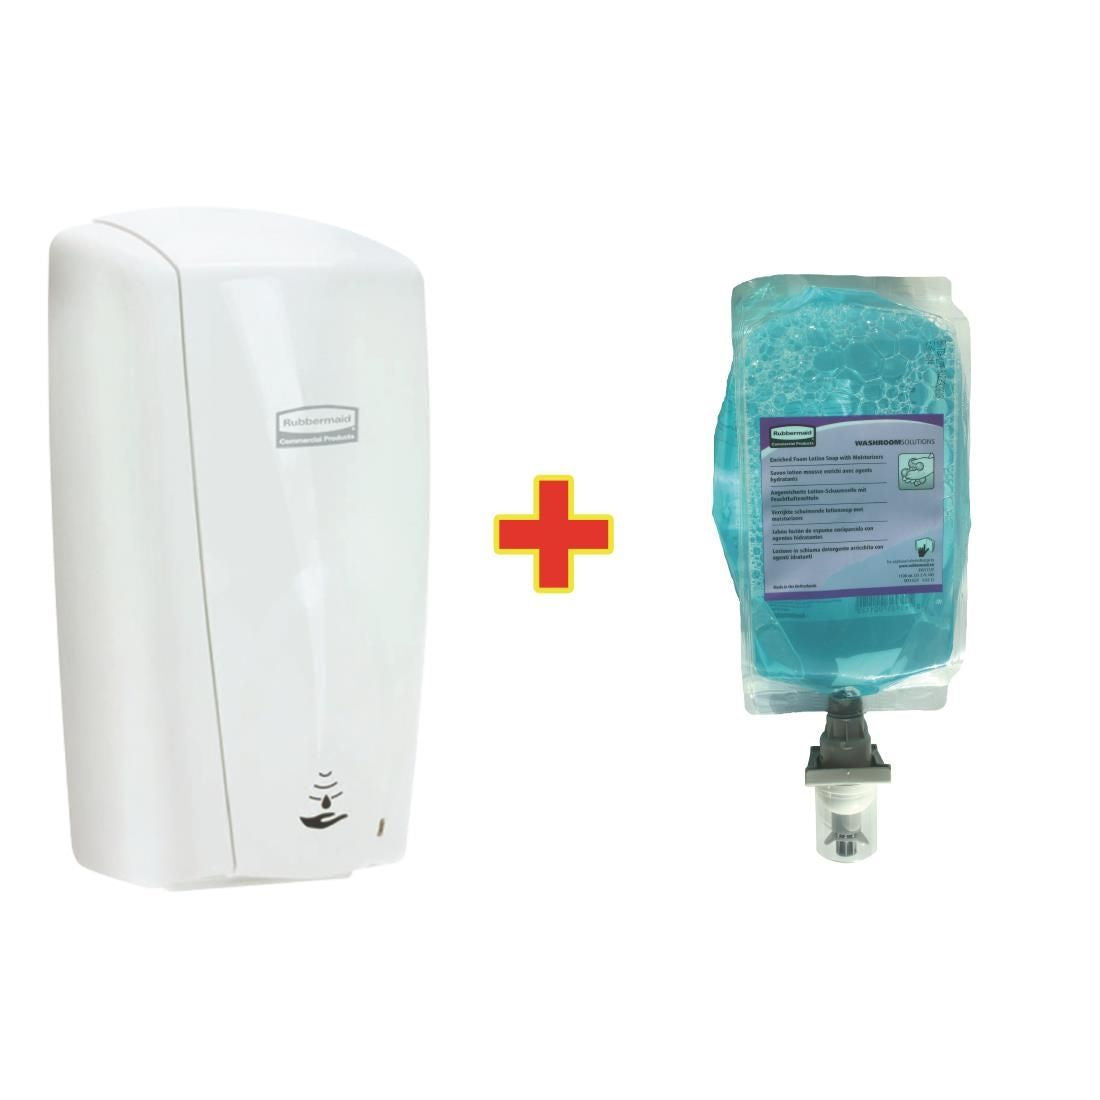 S813 Special Offer Rubbermaid AutoFoam Dispenser and 4 Perfumed Foam Hand Soaps 1.1Ltr